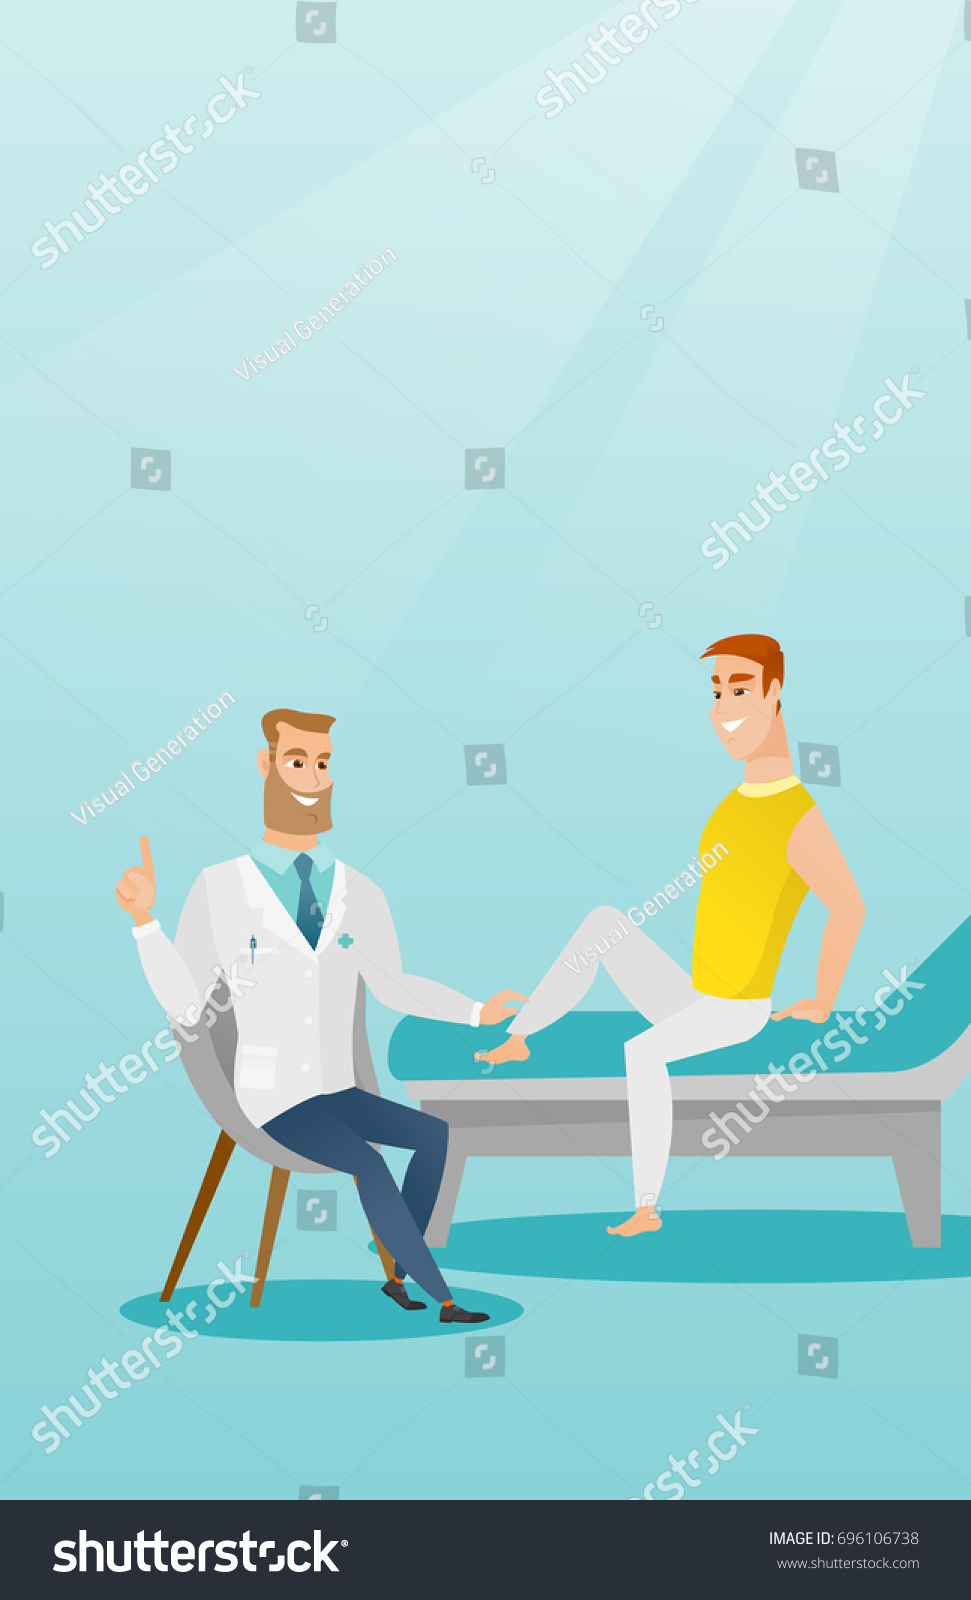 Caucasian Gym Doctor Checking Ankle Of A Patient Royalty Free Stock Vector 696106738 